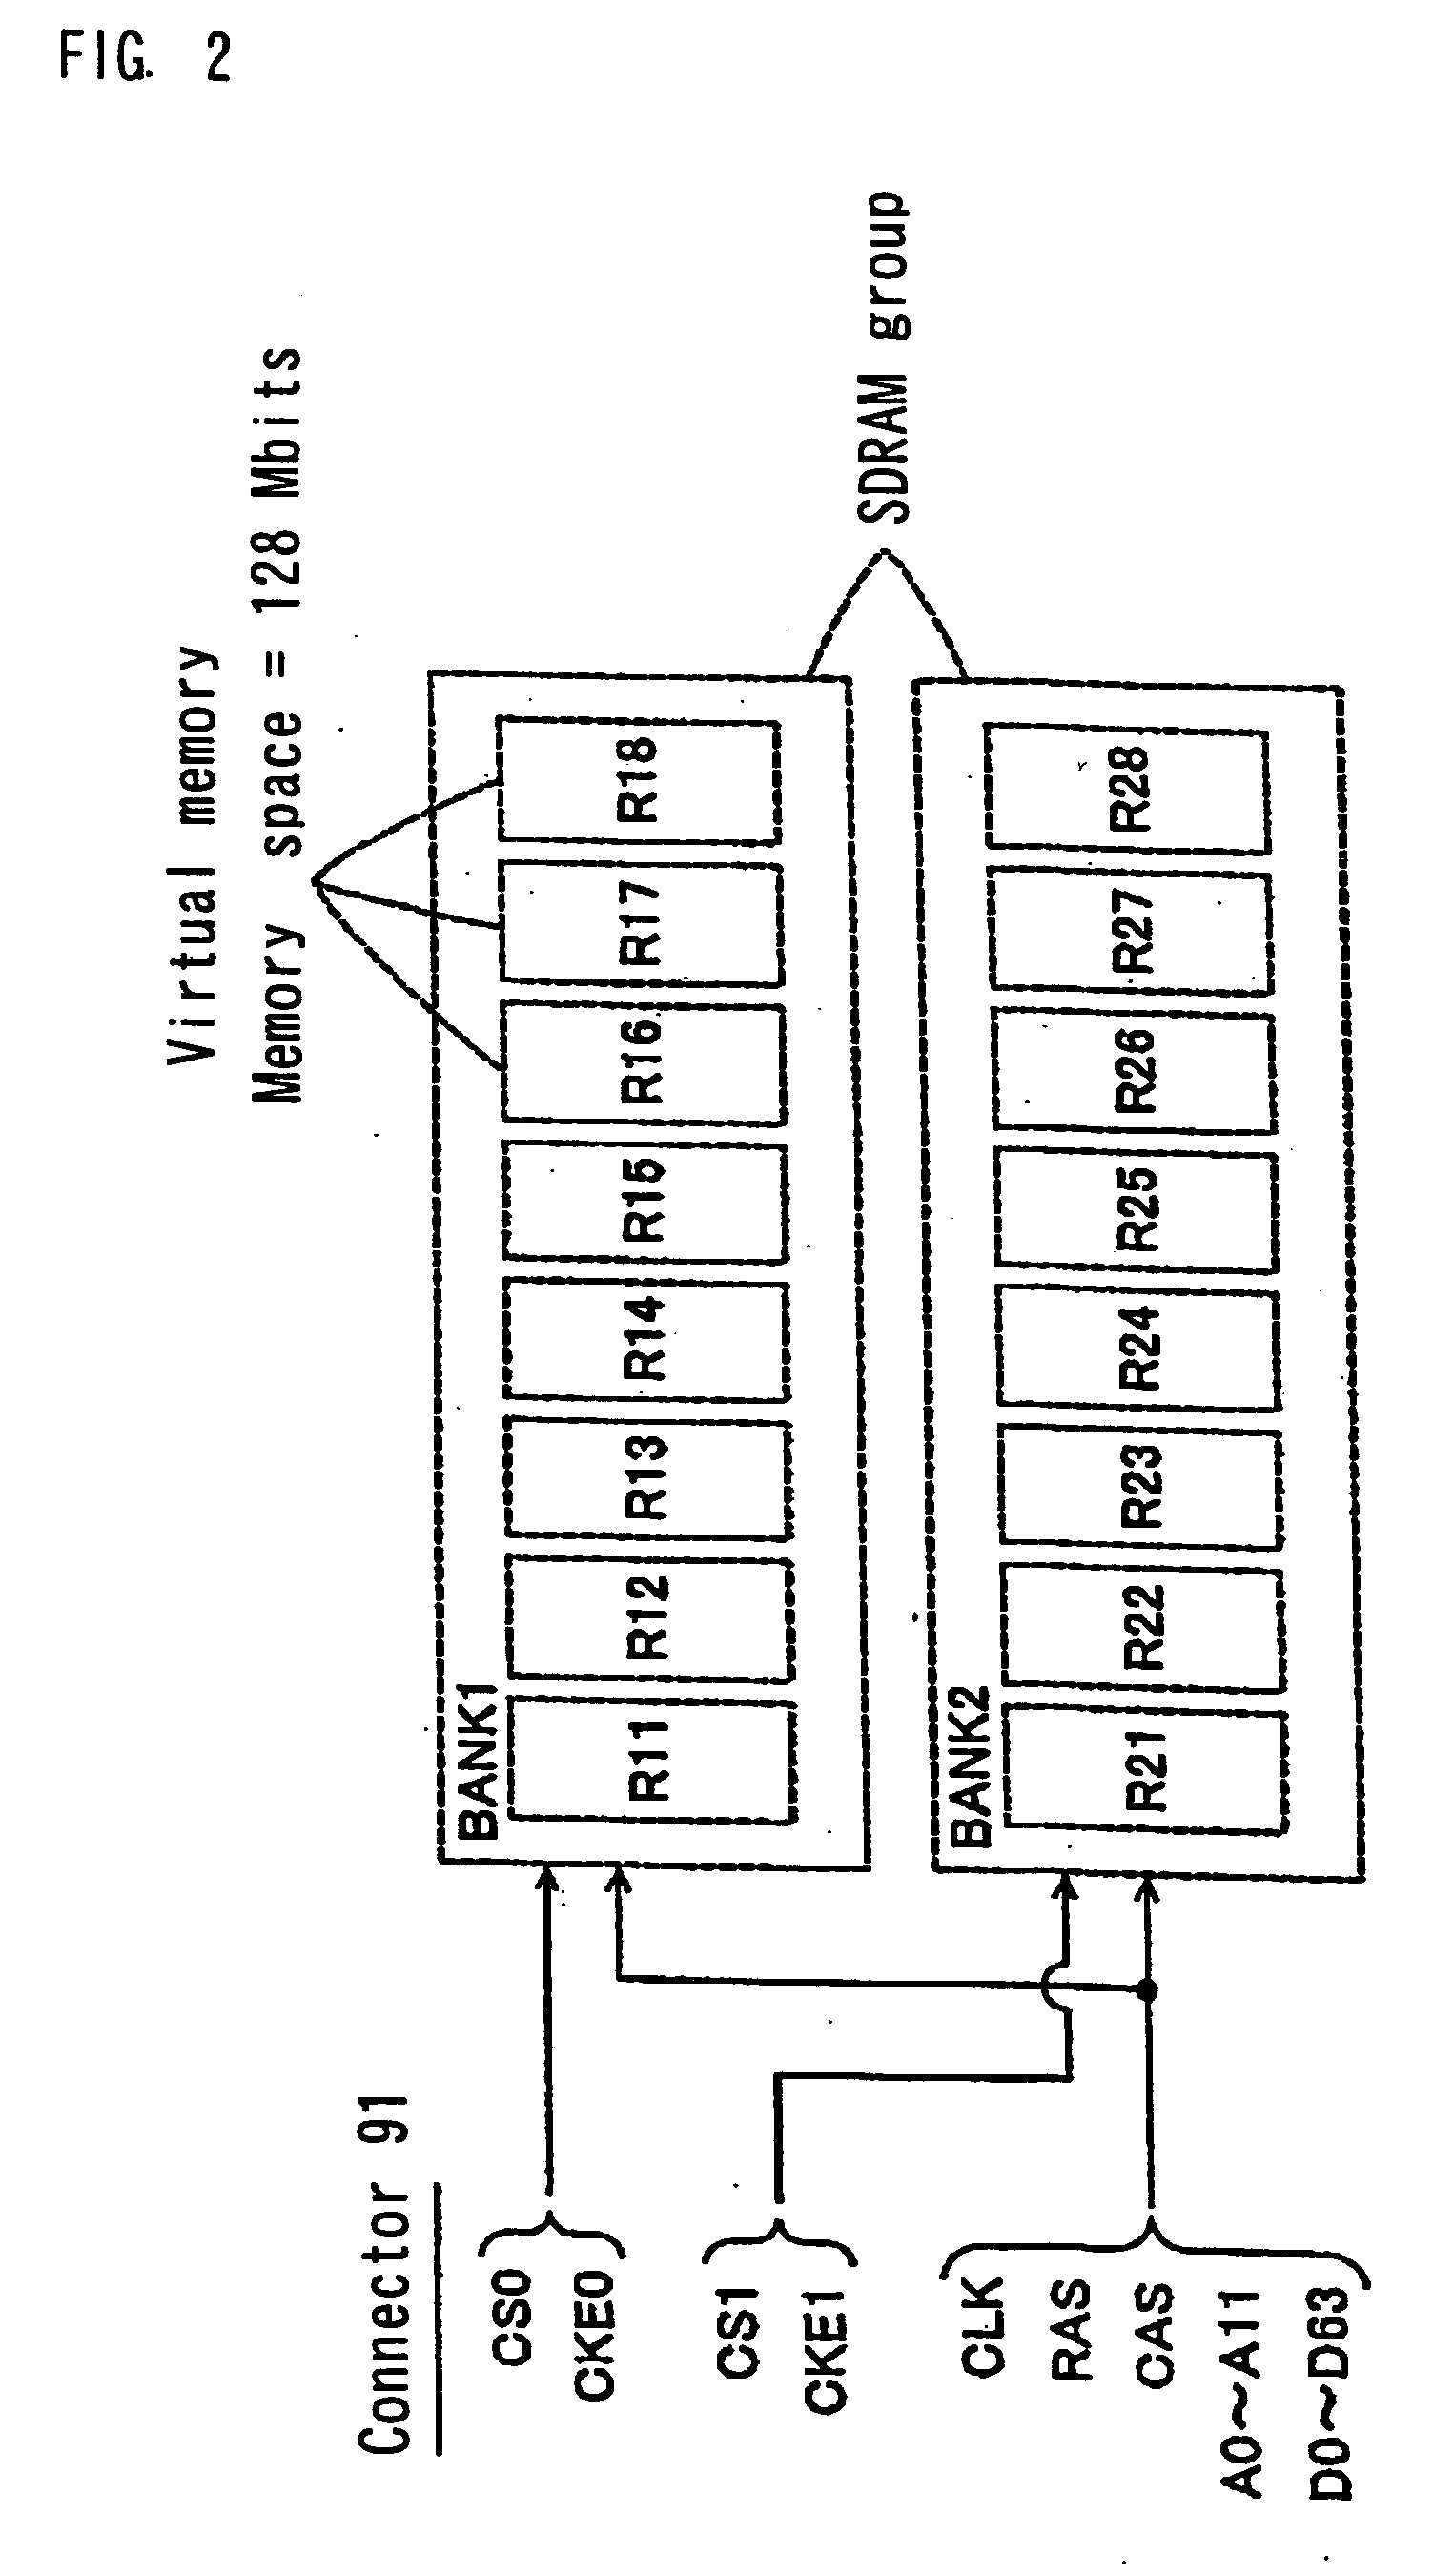 Memory module and memory support module